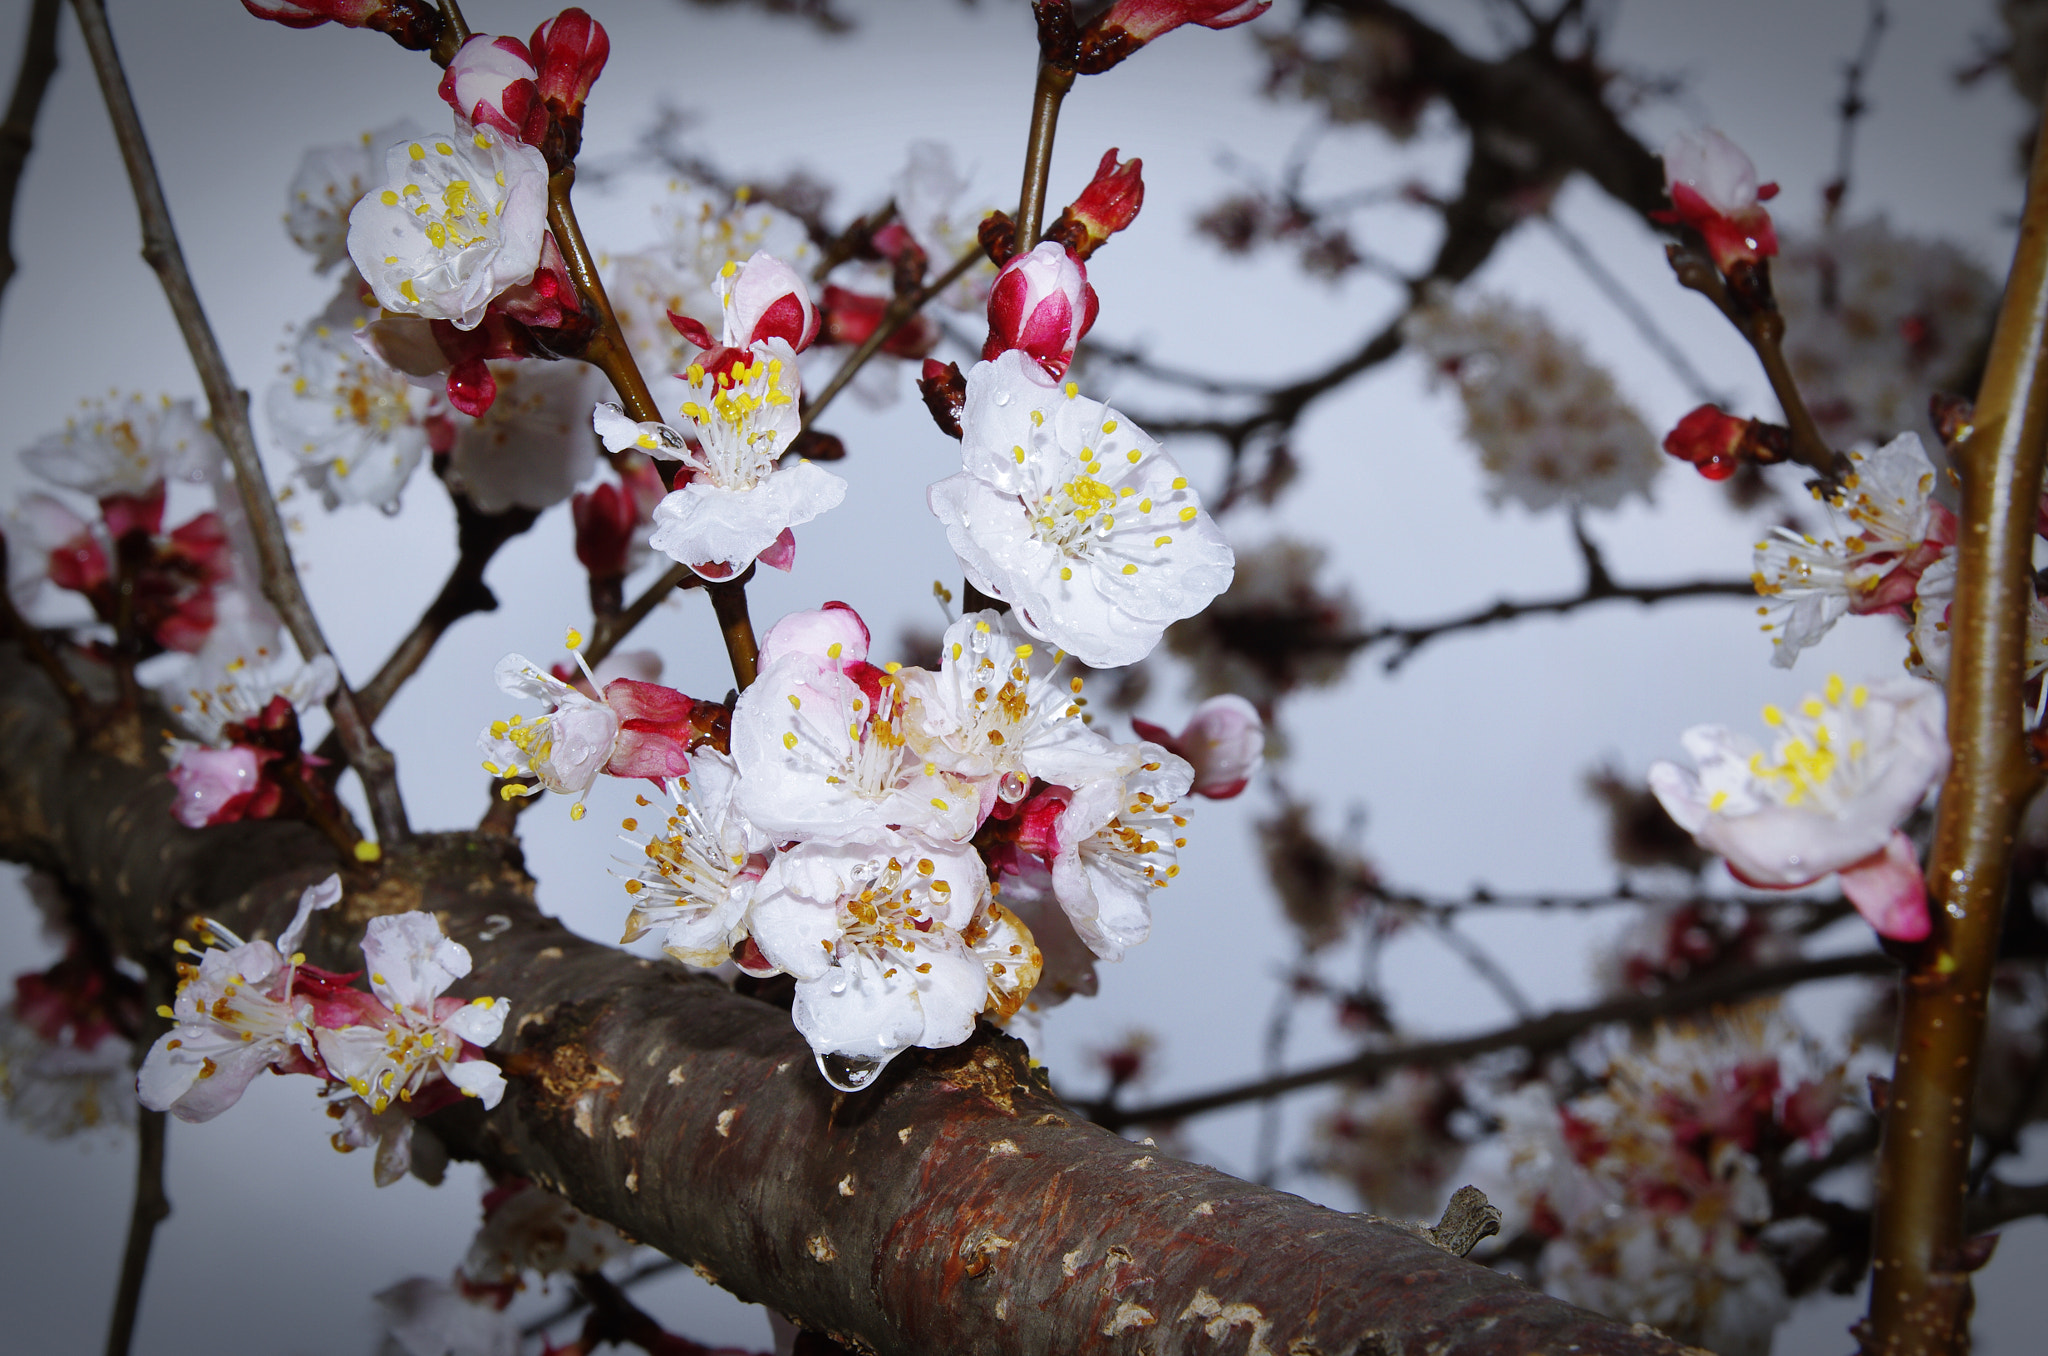 Pentax K-5 sample photo. Hatay'da bahar / spring in hatay (with apricot blossoms) photography